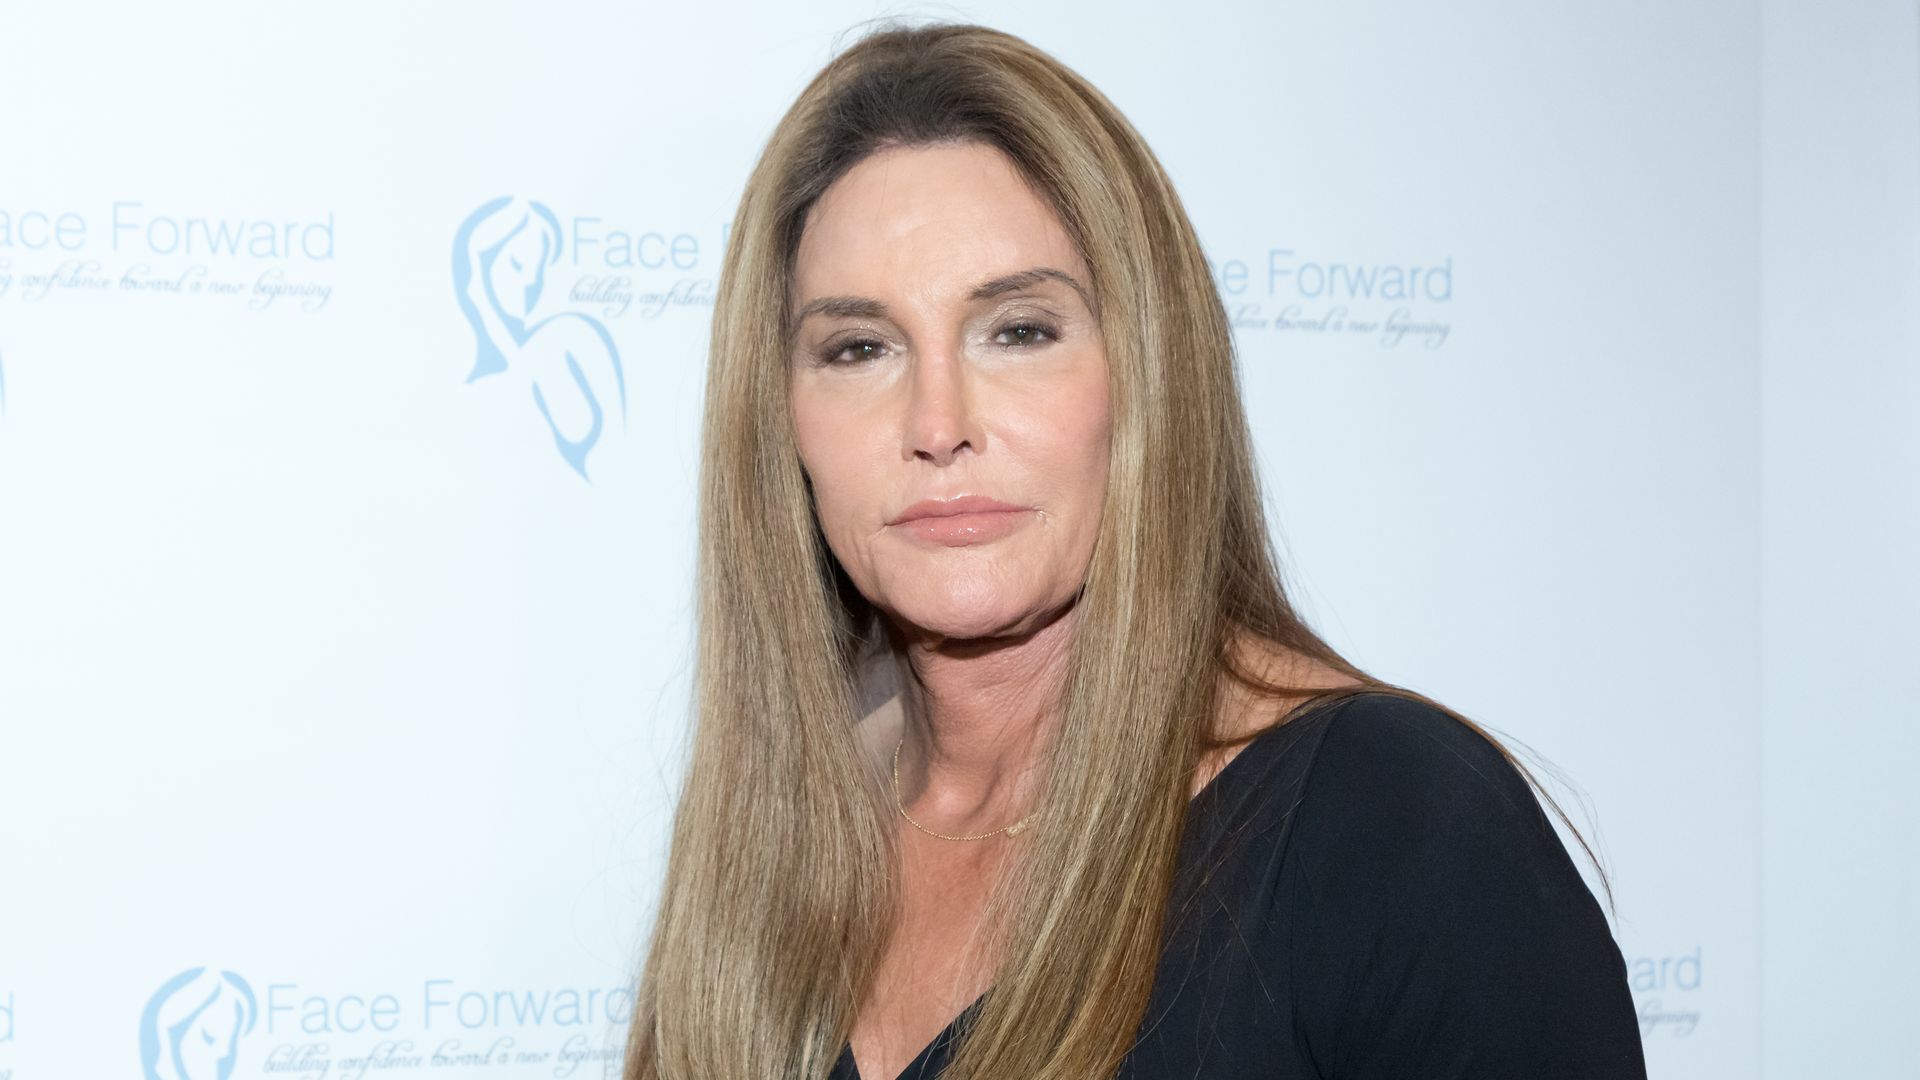 Caitlyn Jenner is seen attending a function.